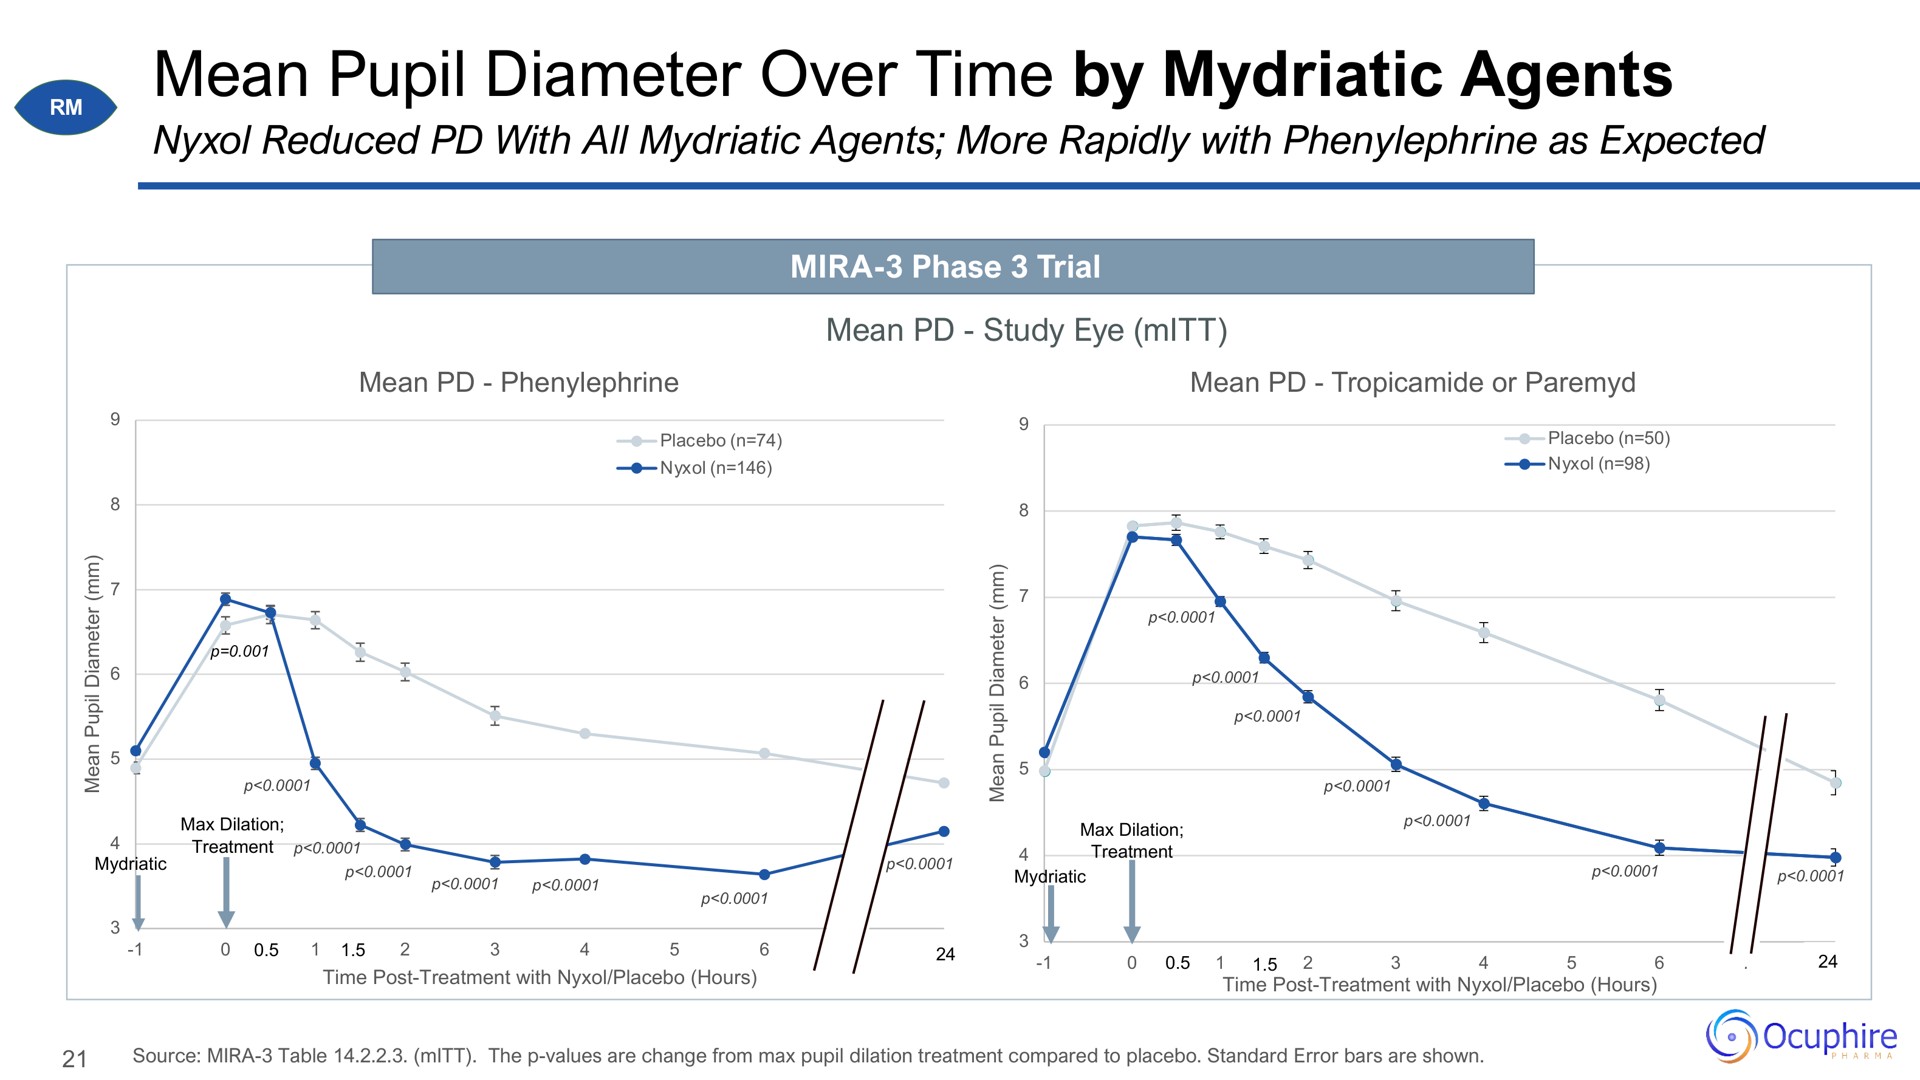 mean pupil diameter over time by mydriatic agents | Ocuphire Pharma